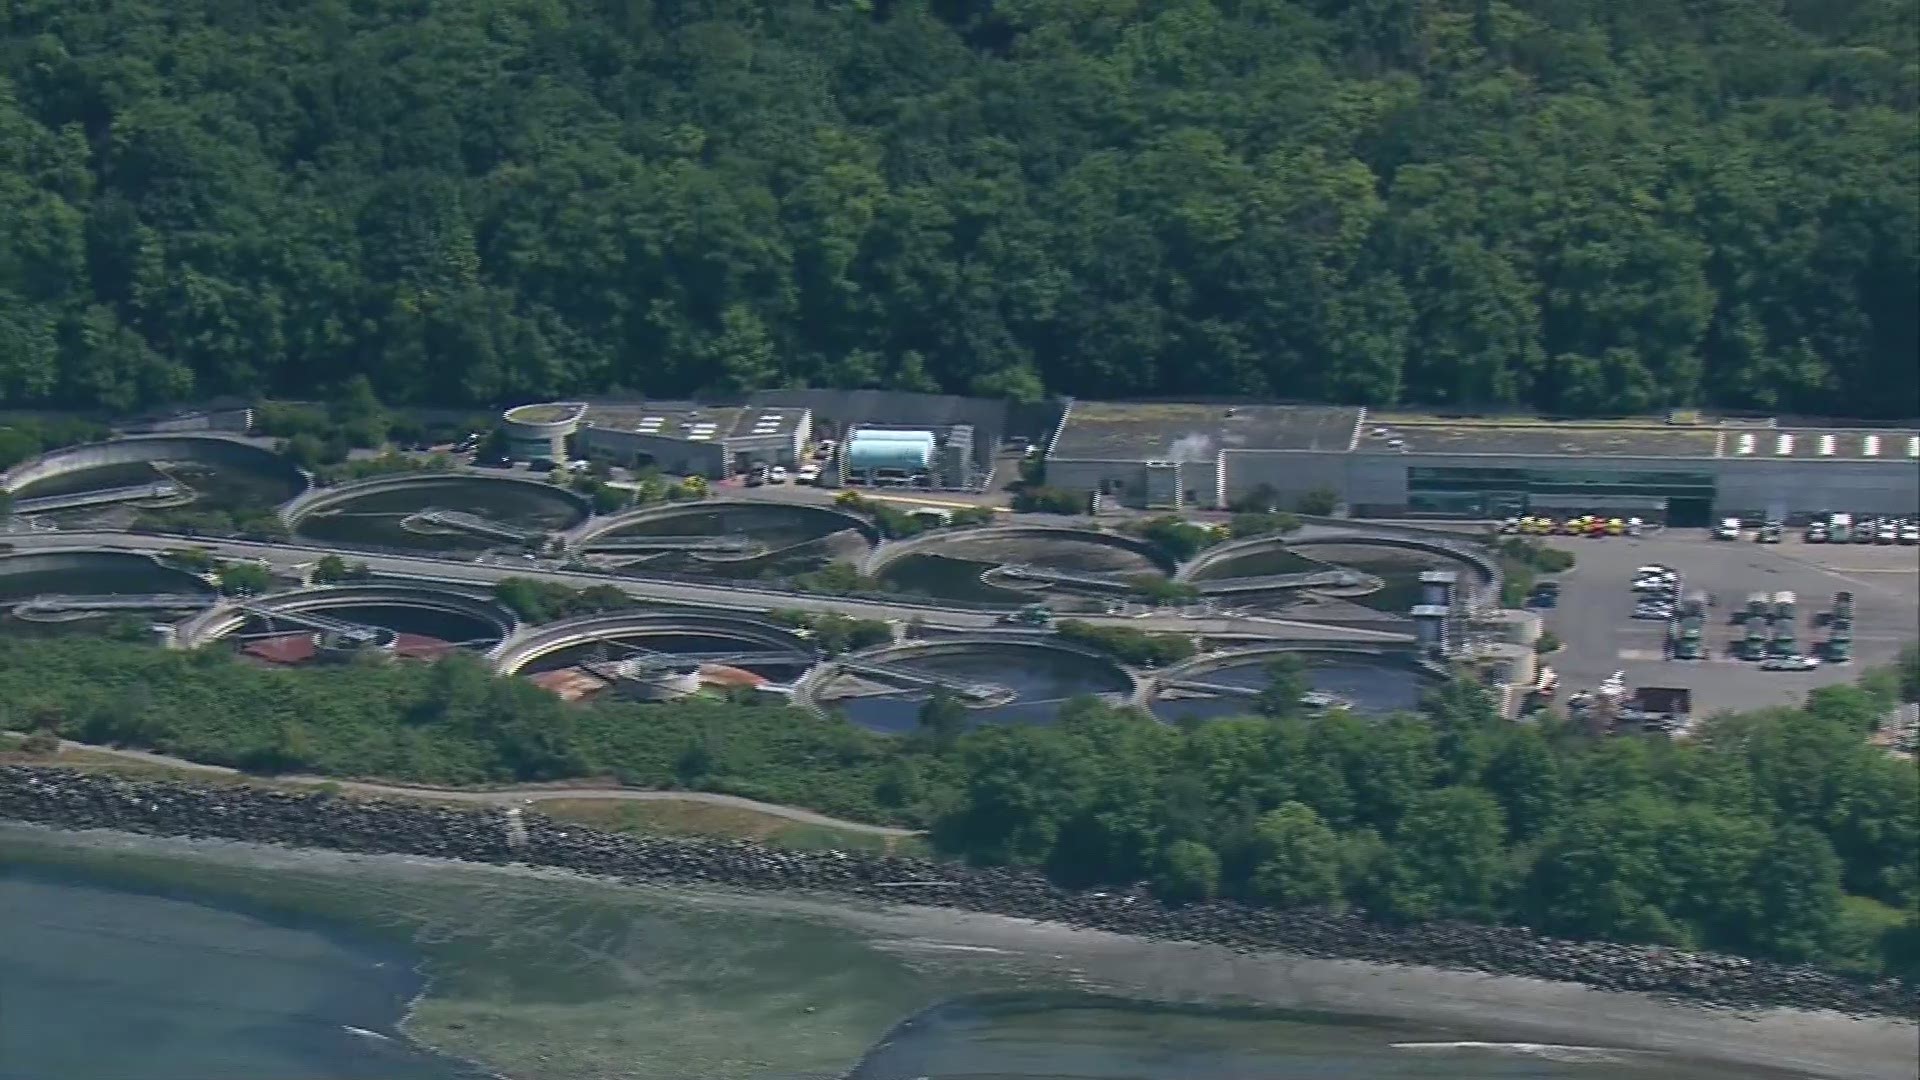 SkyKING flew over the West Point Wastewater Treatment Plant after 3 million gallons of untreated sewage poured into Puget Sound Friday.